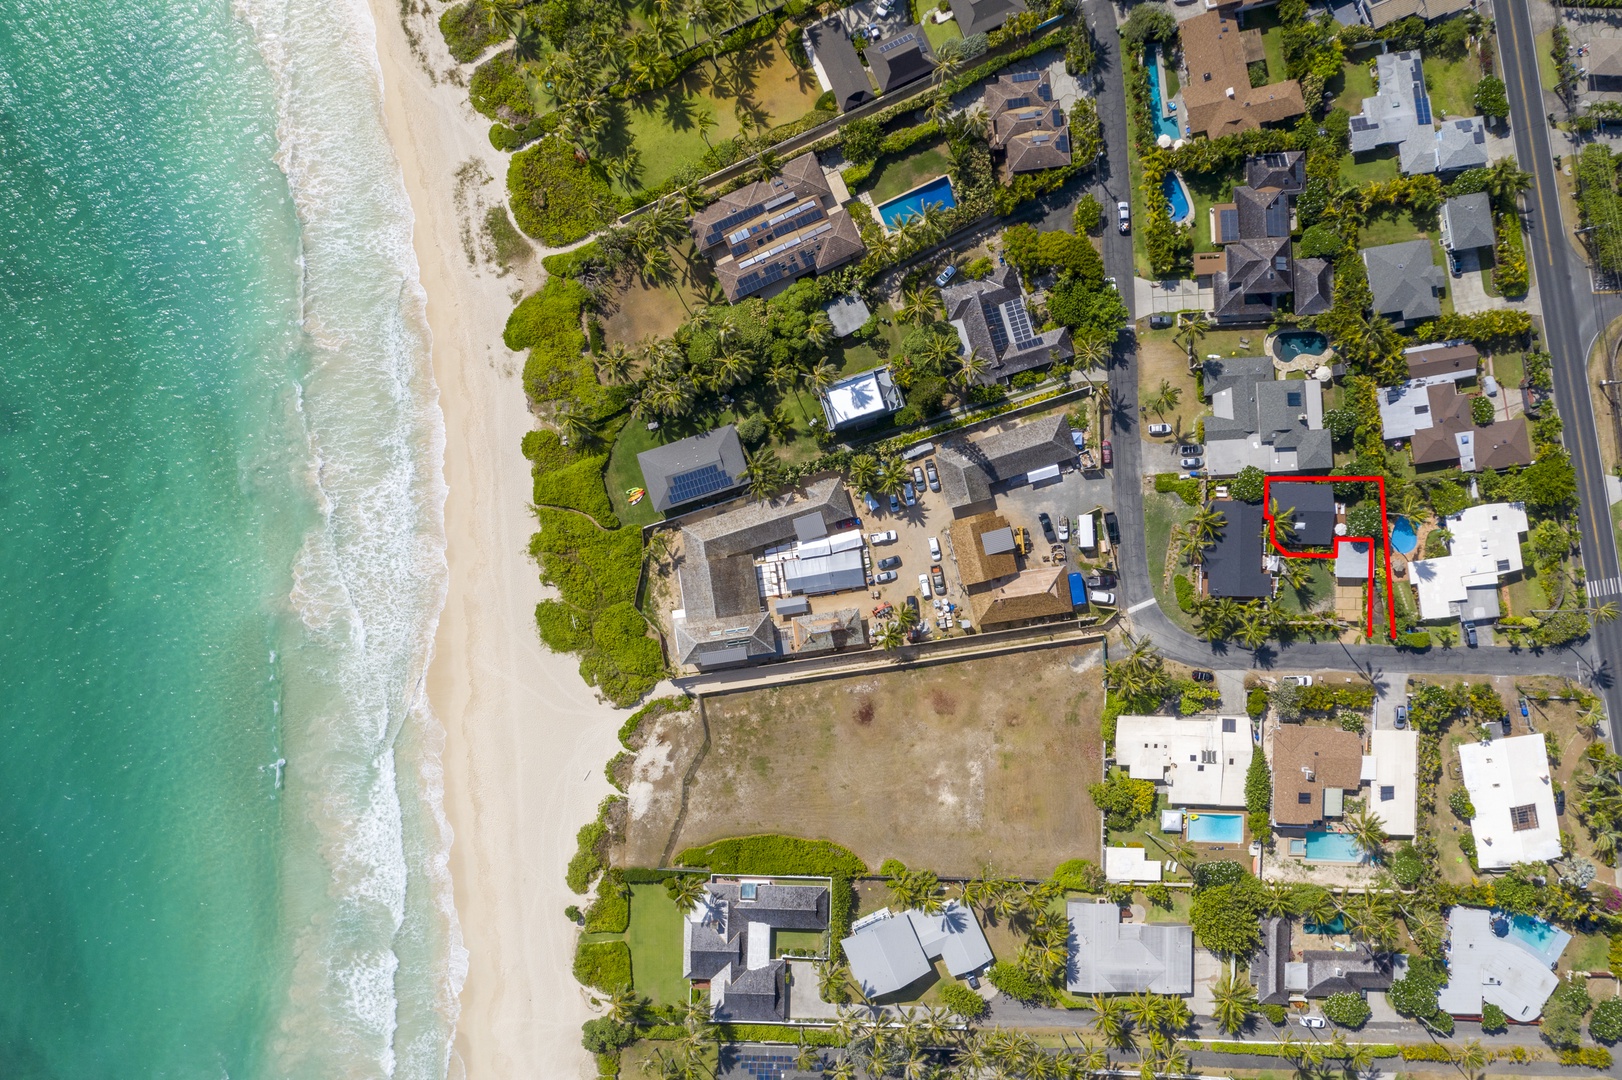 Kailua Vacation Rentals, Ranch Beach House - Aerial View showing the home's proximity to the local beaches